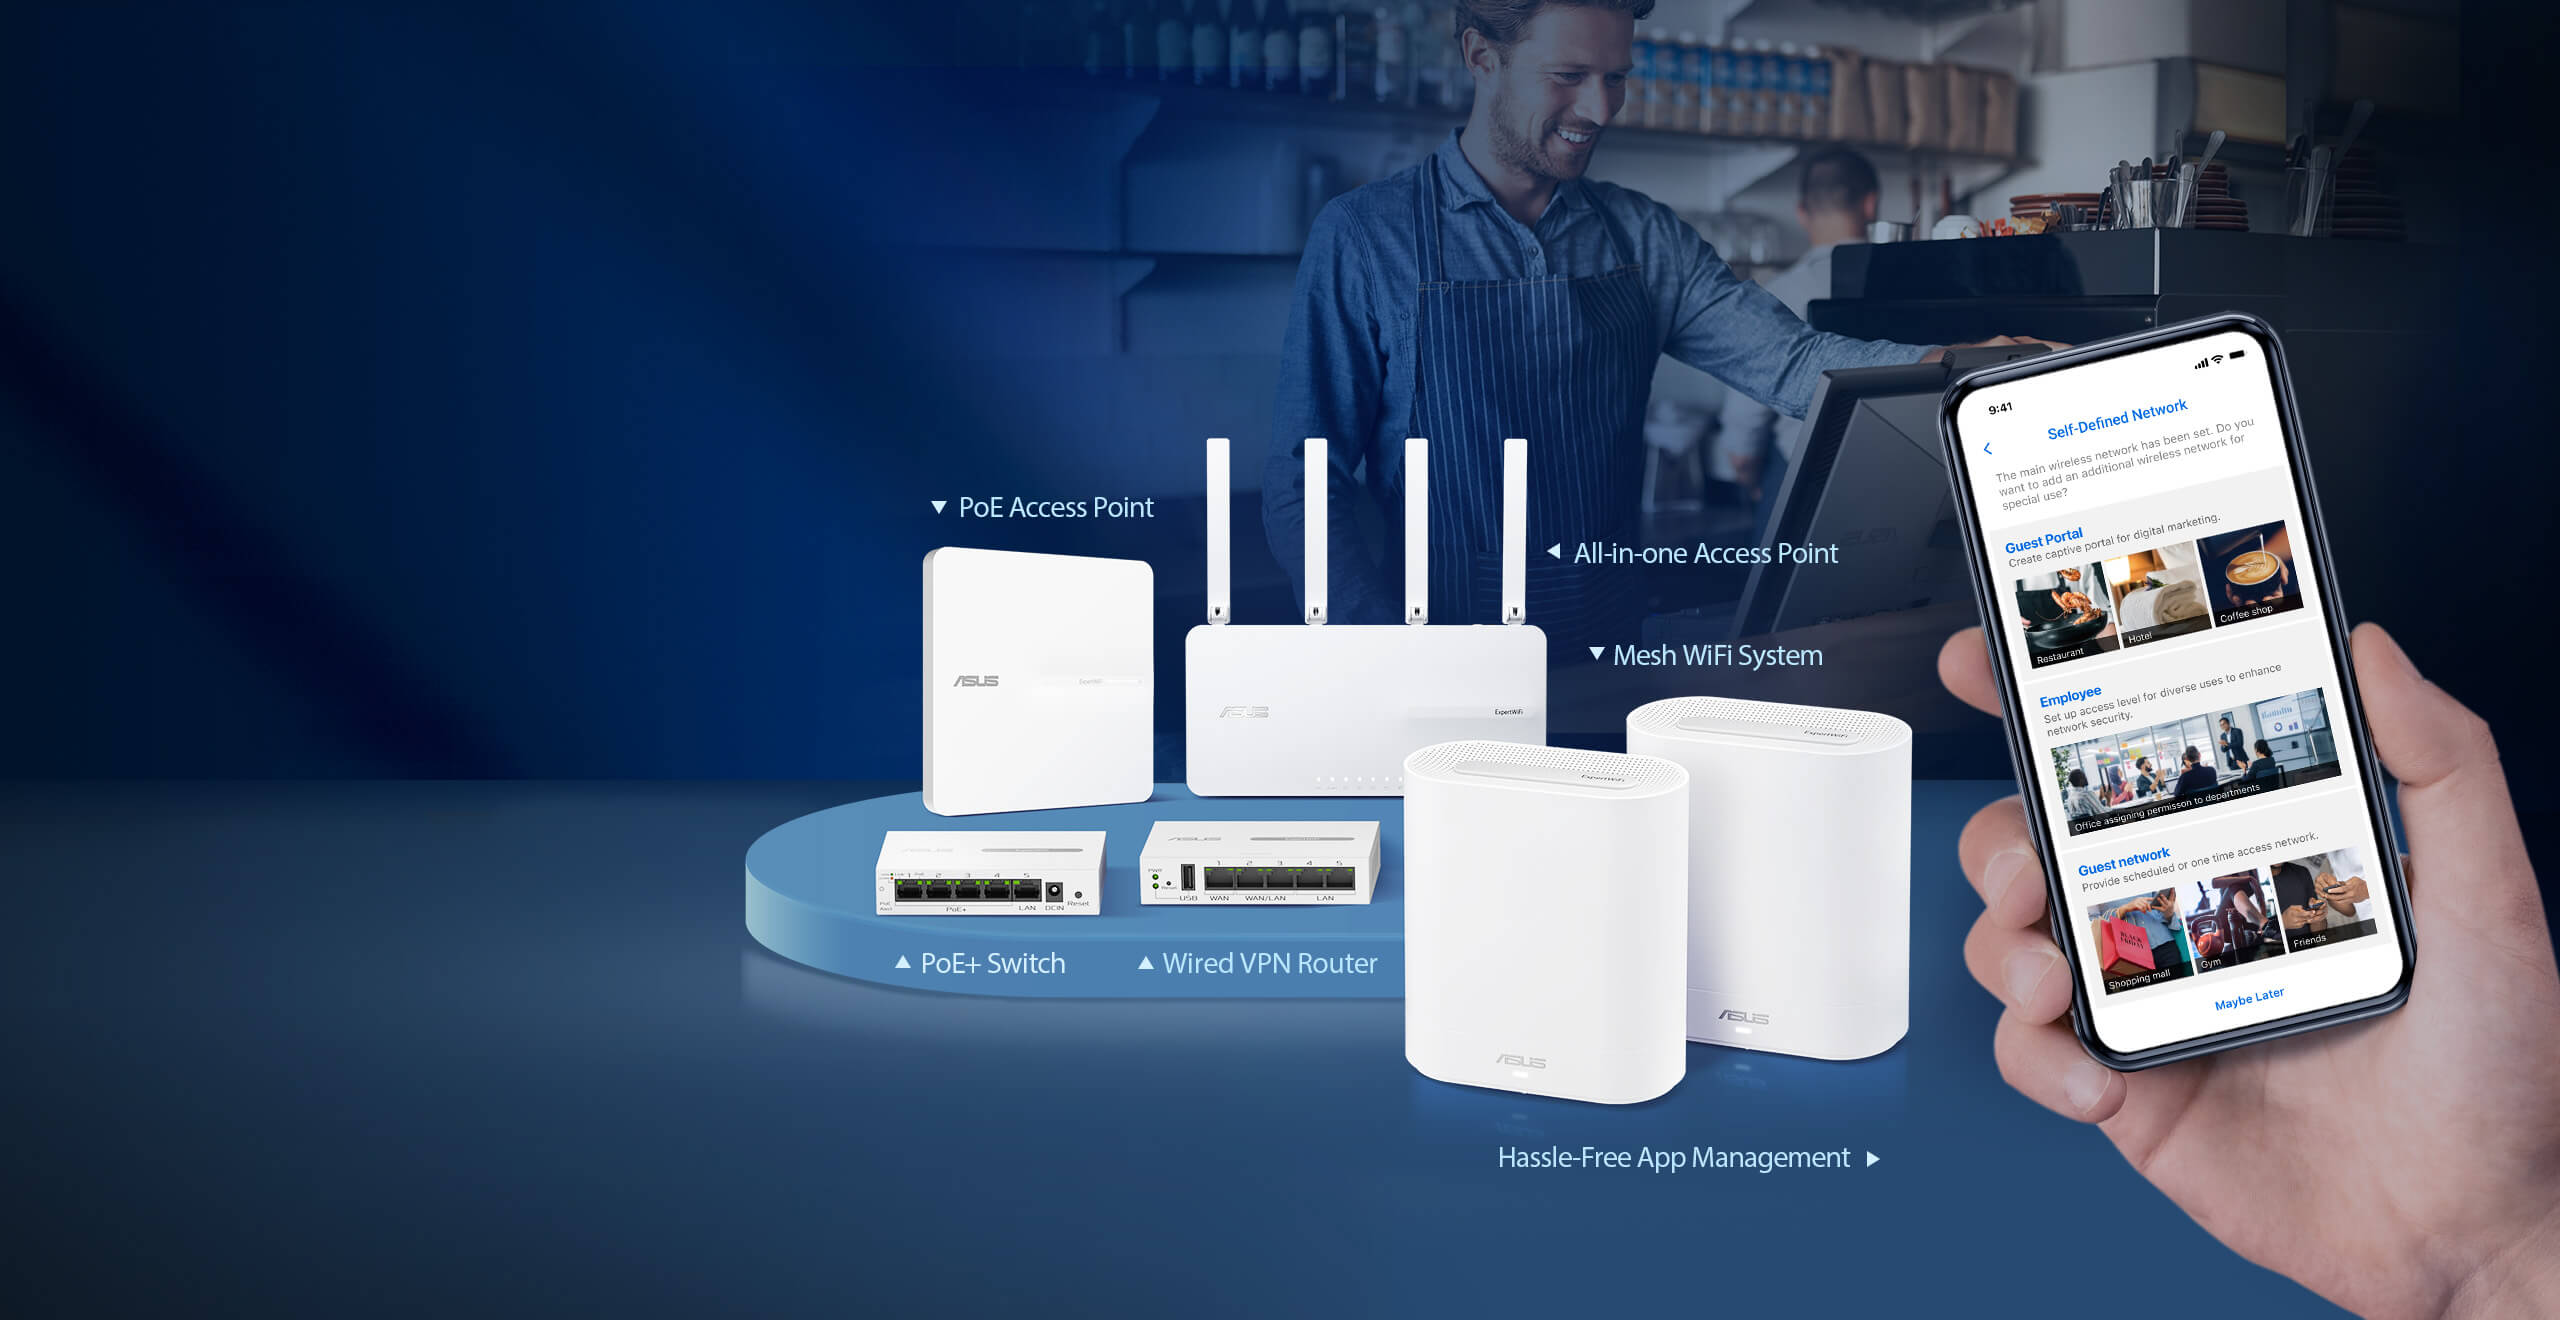 The ExpertWiFi product lineup in a café setting, with a hand holding a phone showing the ExpertWiFi SDN feature UI. From left to right in the back: EBP15 PoE AP, EBR63 all-in-one AP. Front: EBP15 PoE+ switch, EBP15 wired VPN router, and two packs of EBM68 mesh system.